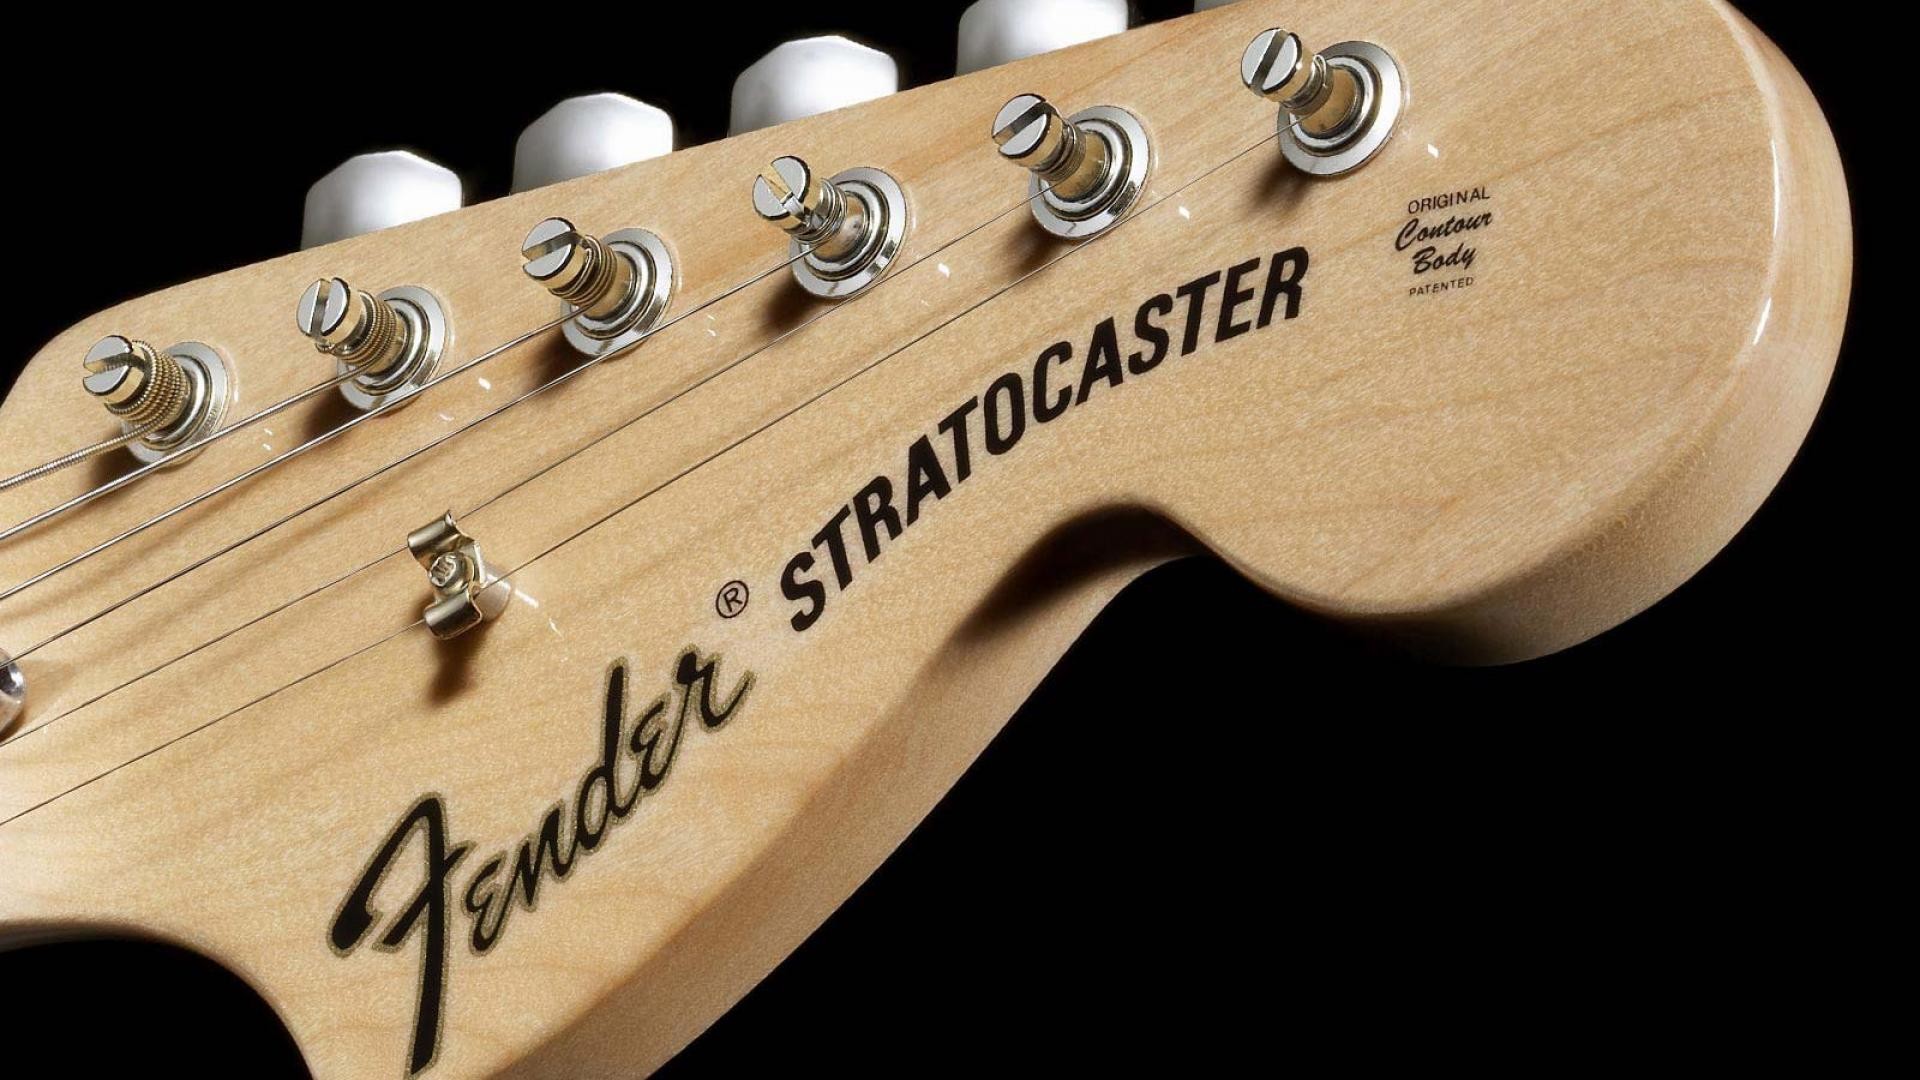 Fender Guitar Photos Download The BEST Free Fender Guitar Stock Photos   HD Images